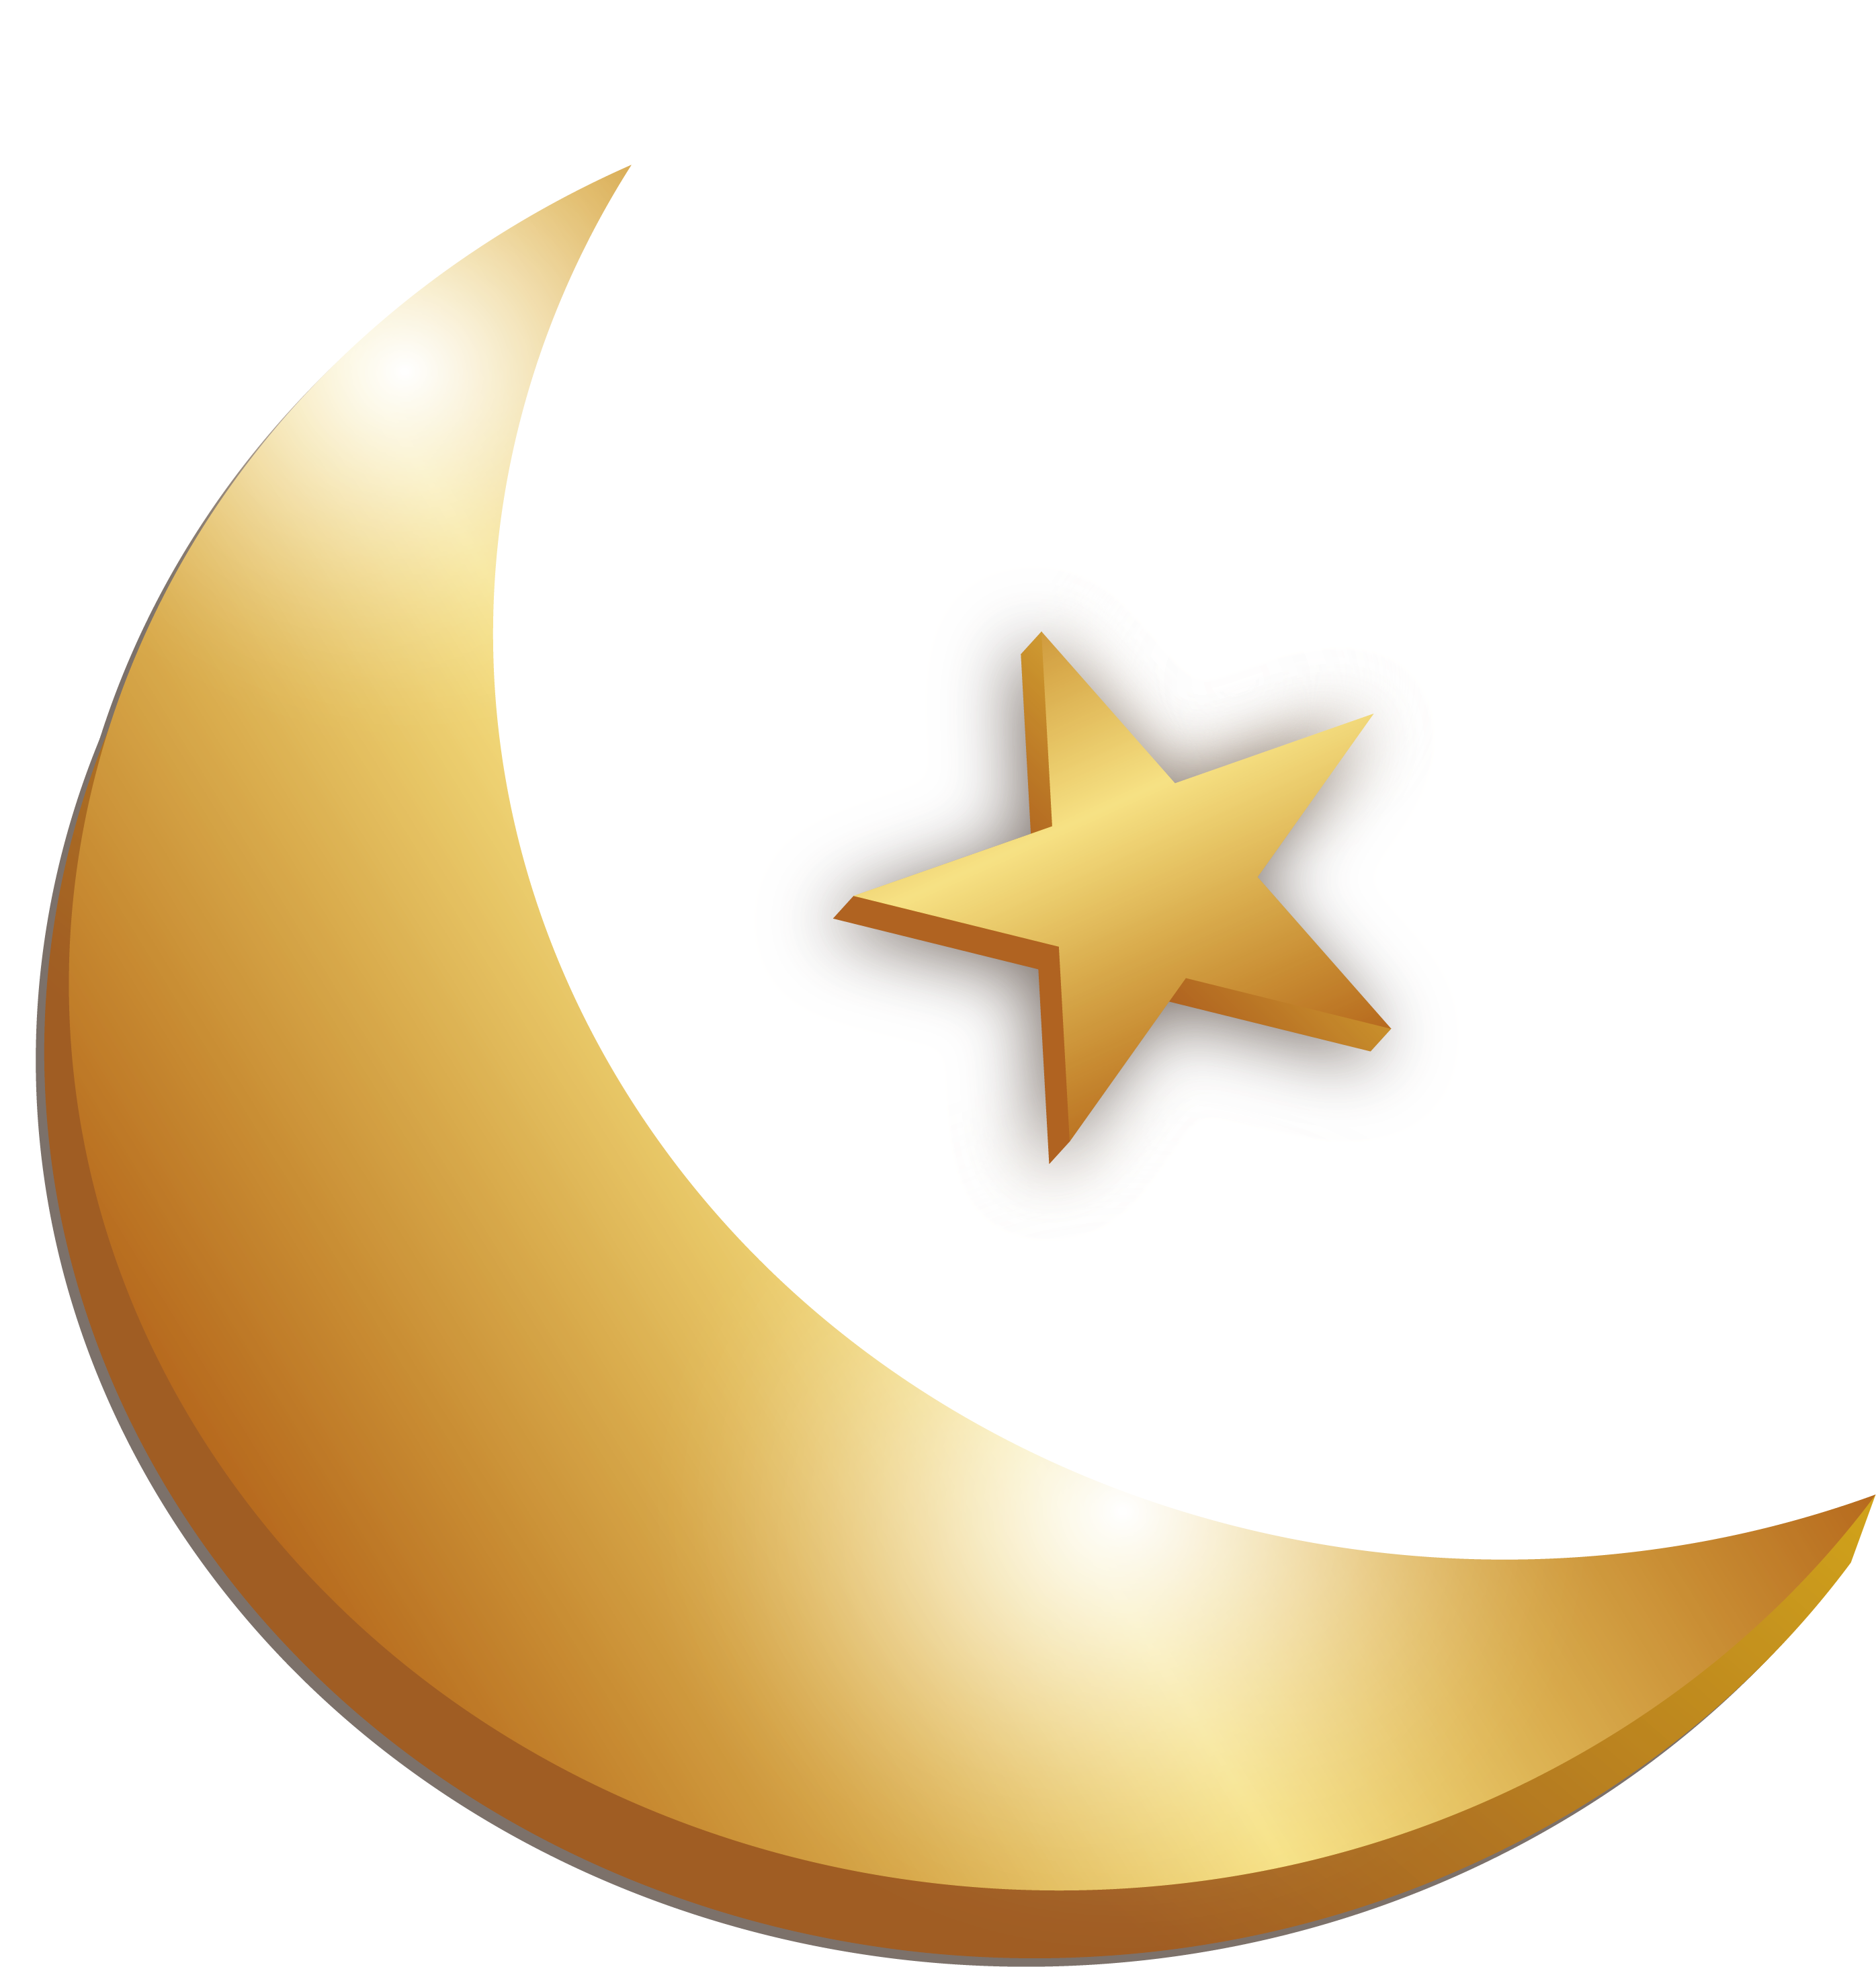 Golden Crescent Moon With Stars Transparent Download Png Image